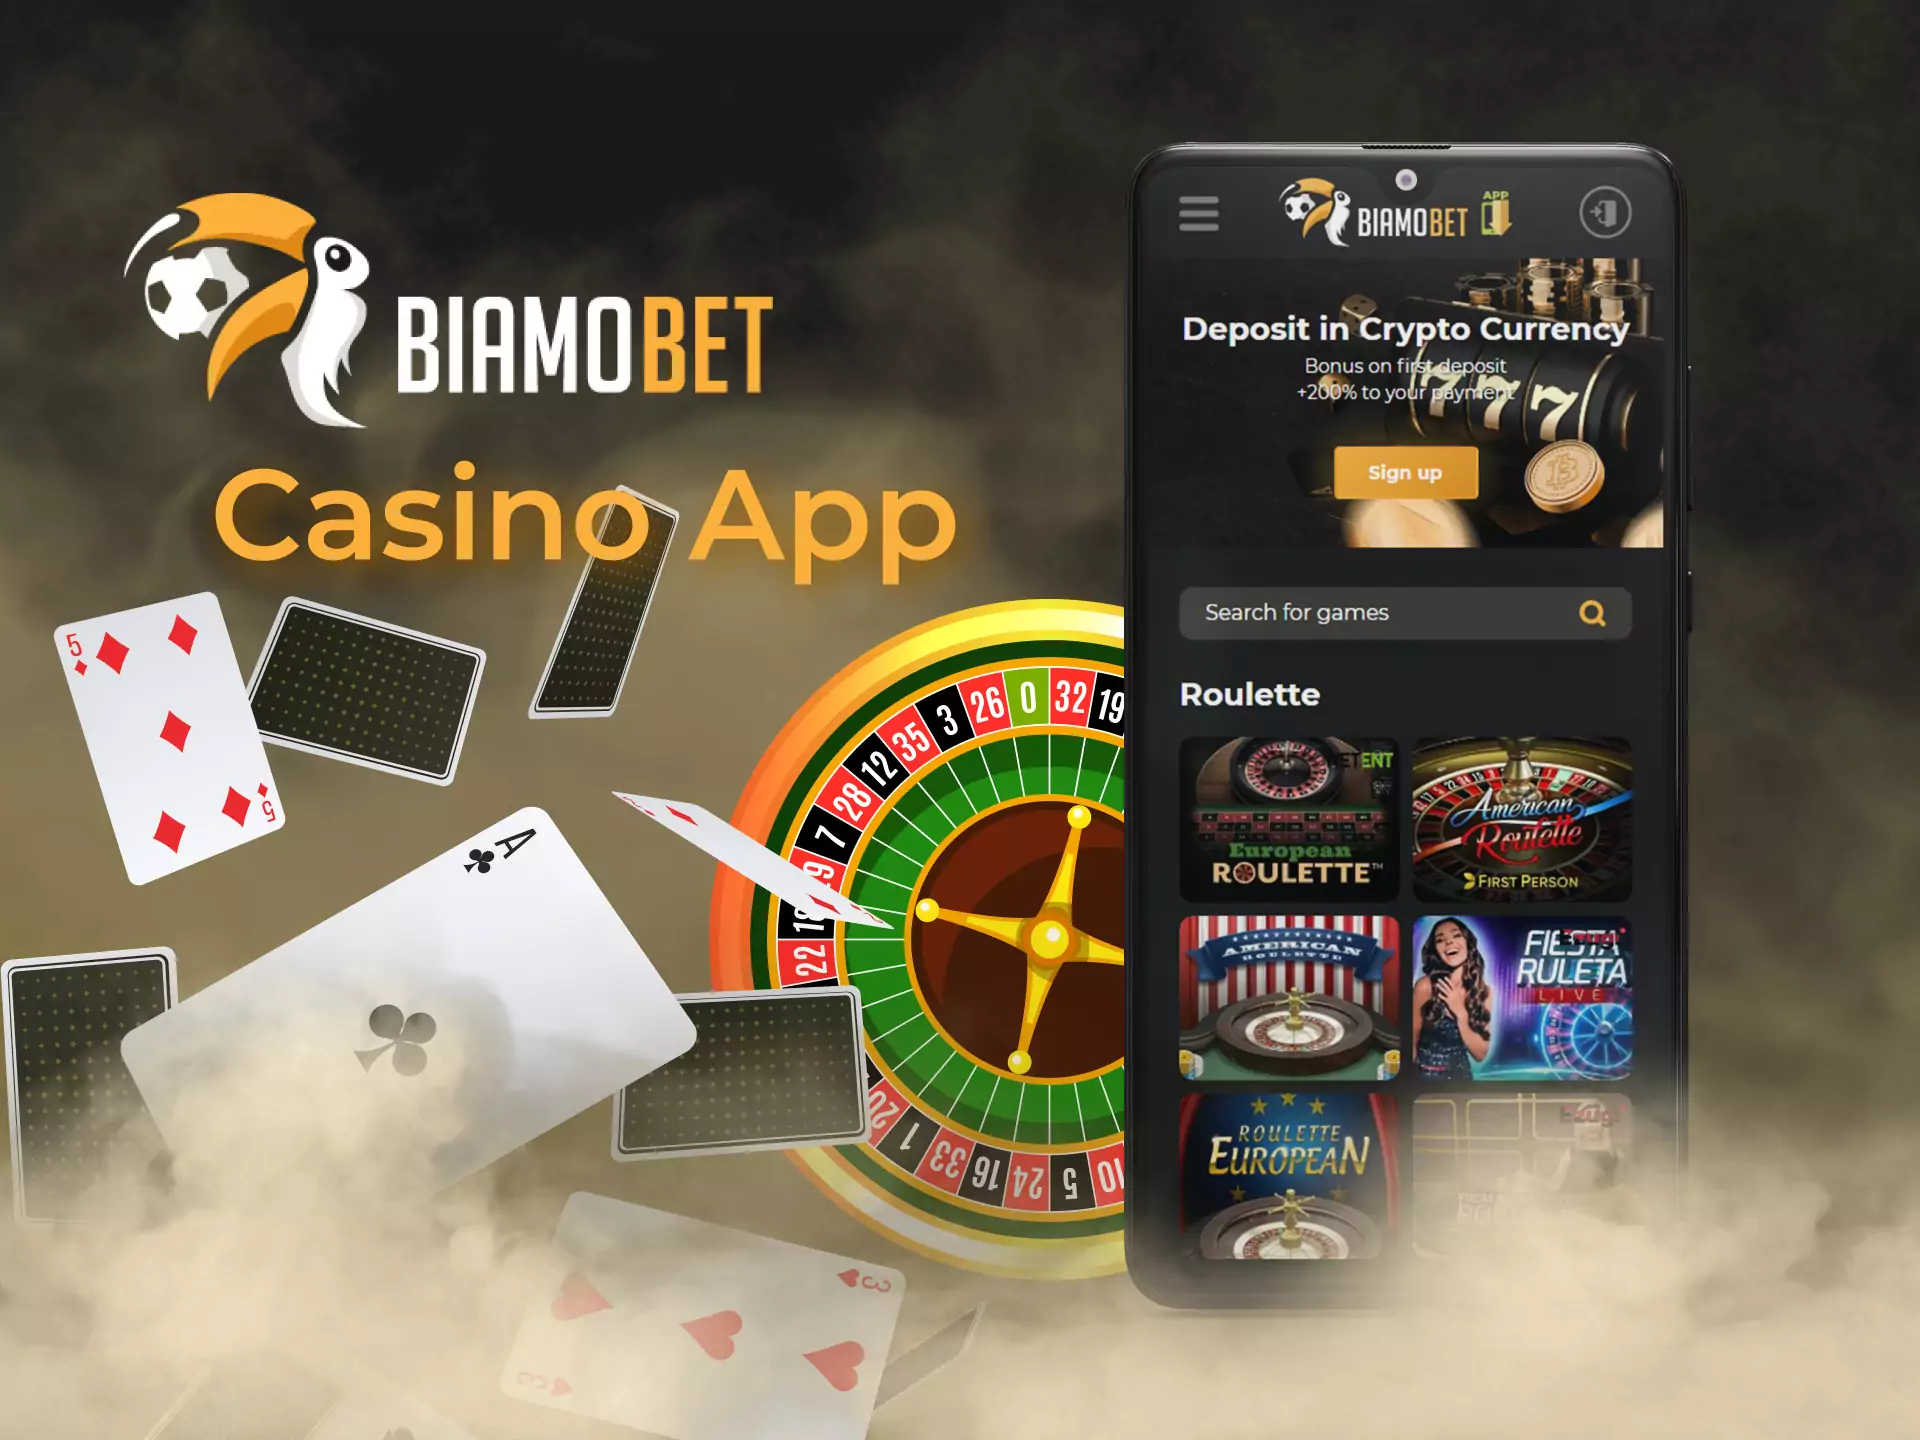 To play casino games on your smartphone, run the Biamobet app and choose a game.